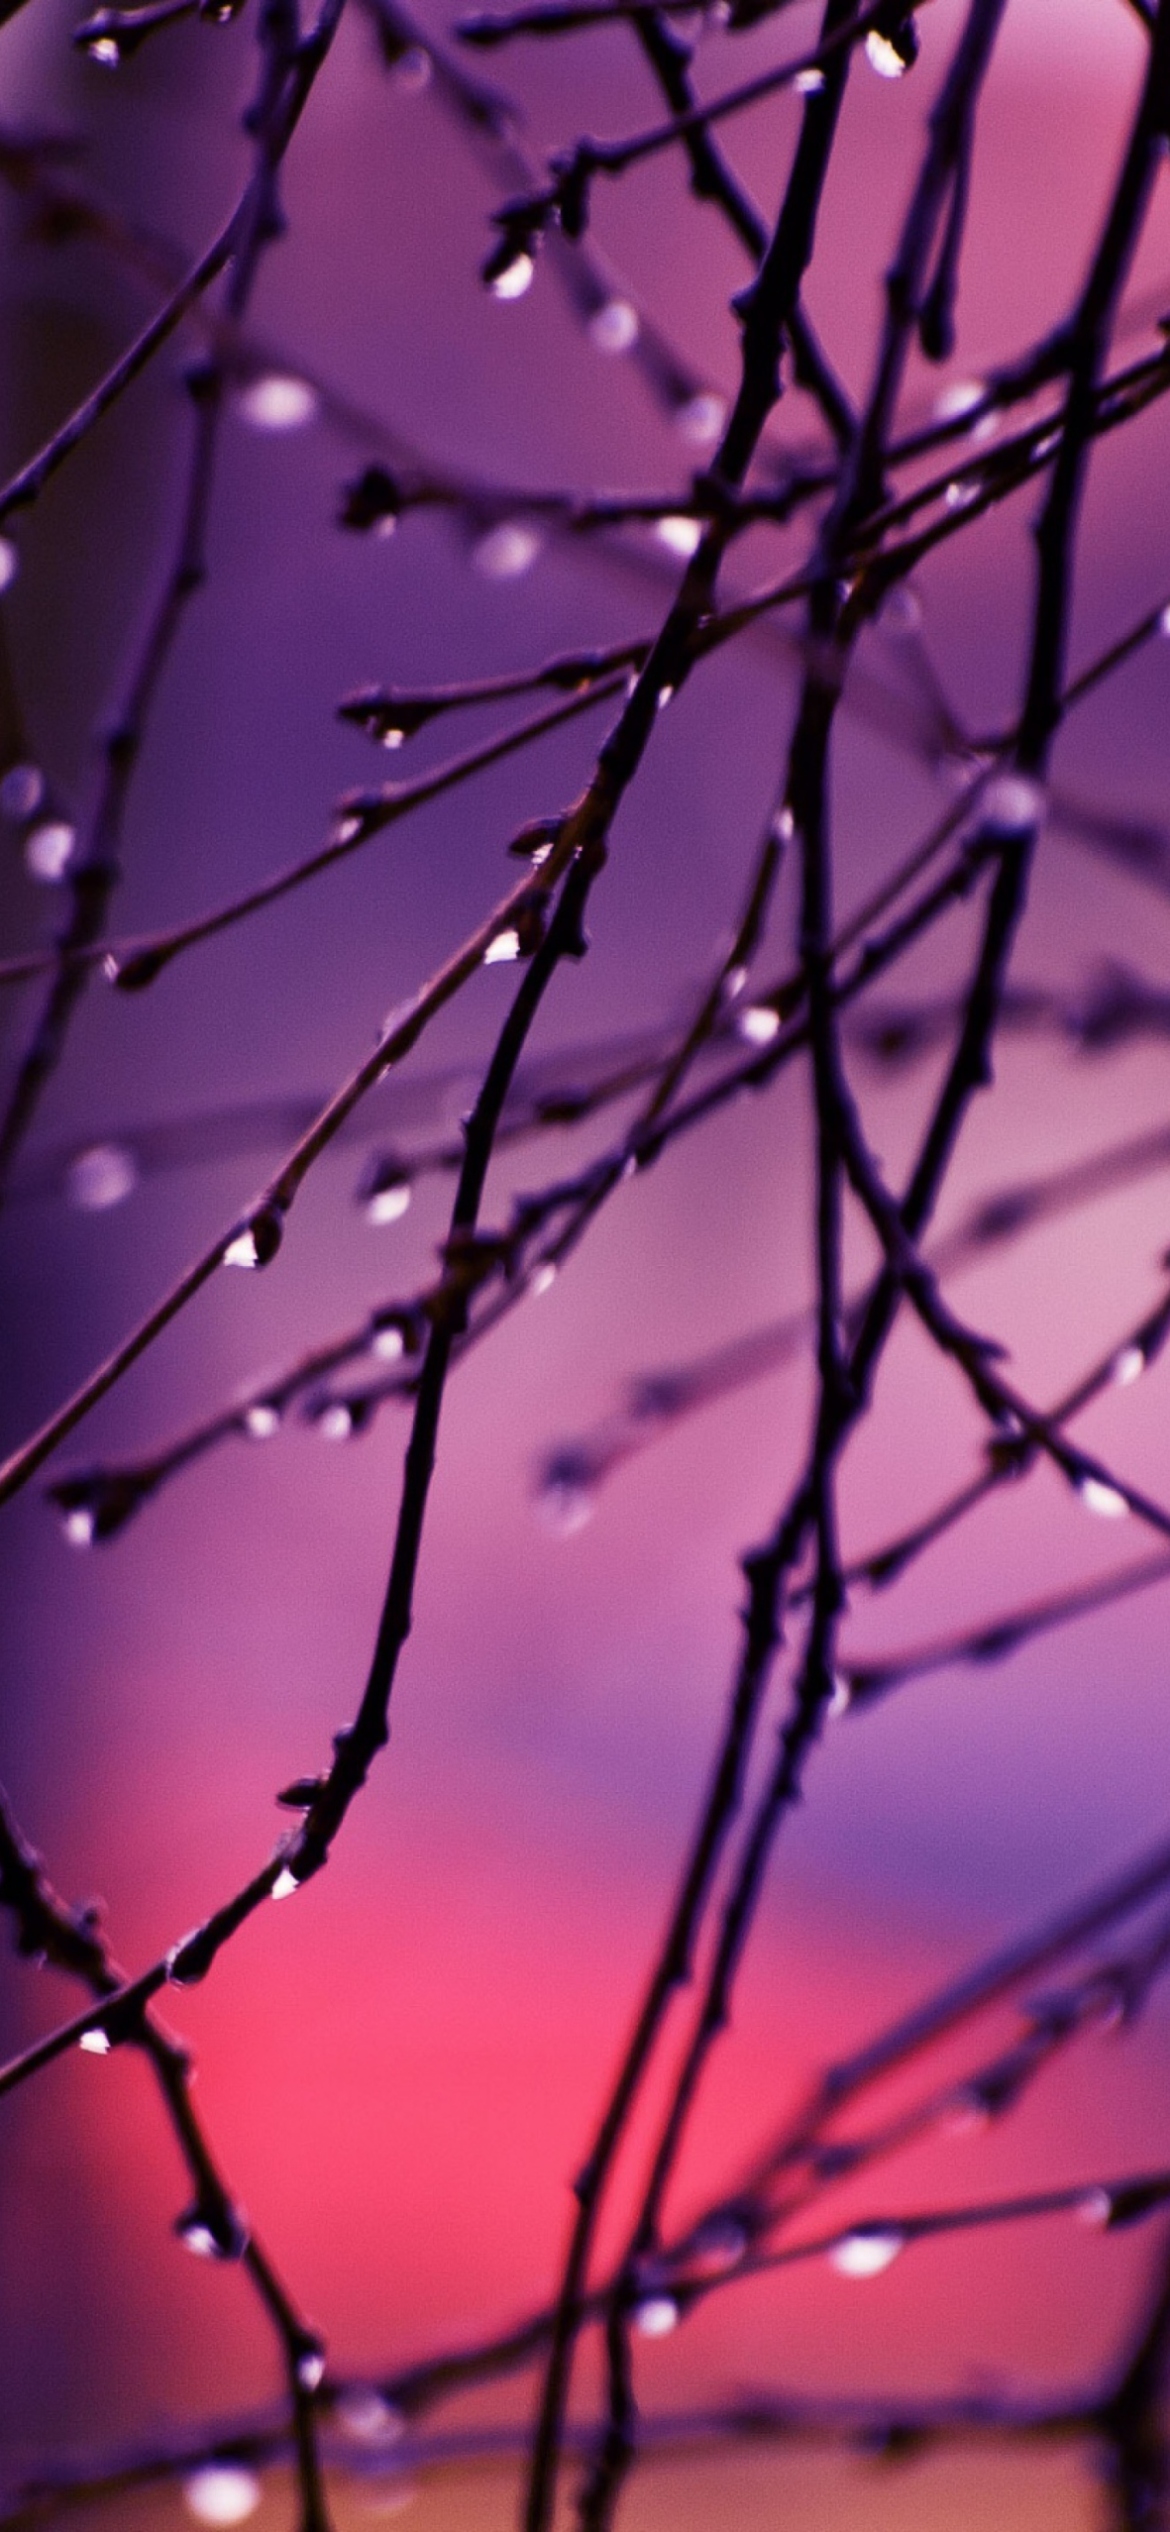 Wet Tree Branches wallpaper 1170x2532